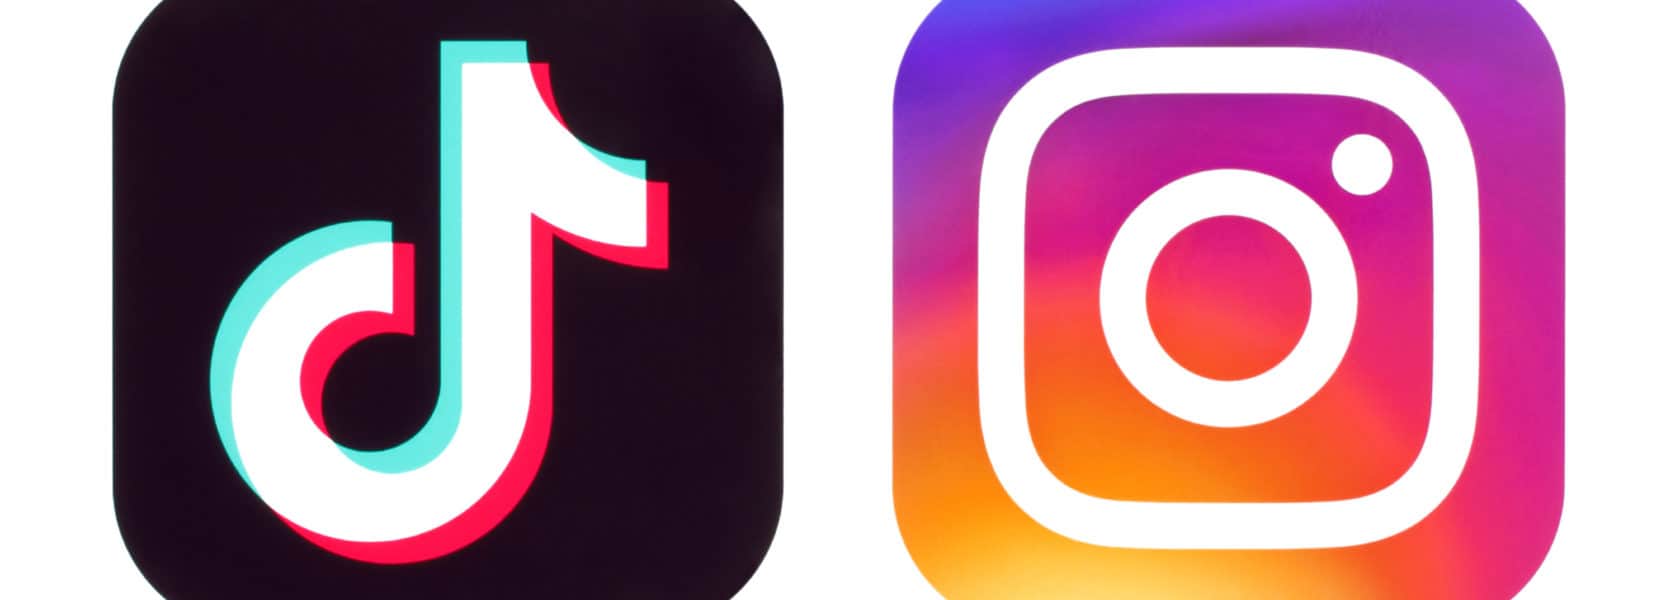 Instagram Reels vs TikTok: Which is better for your business